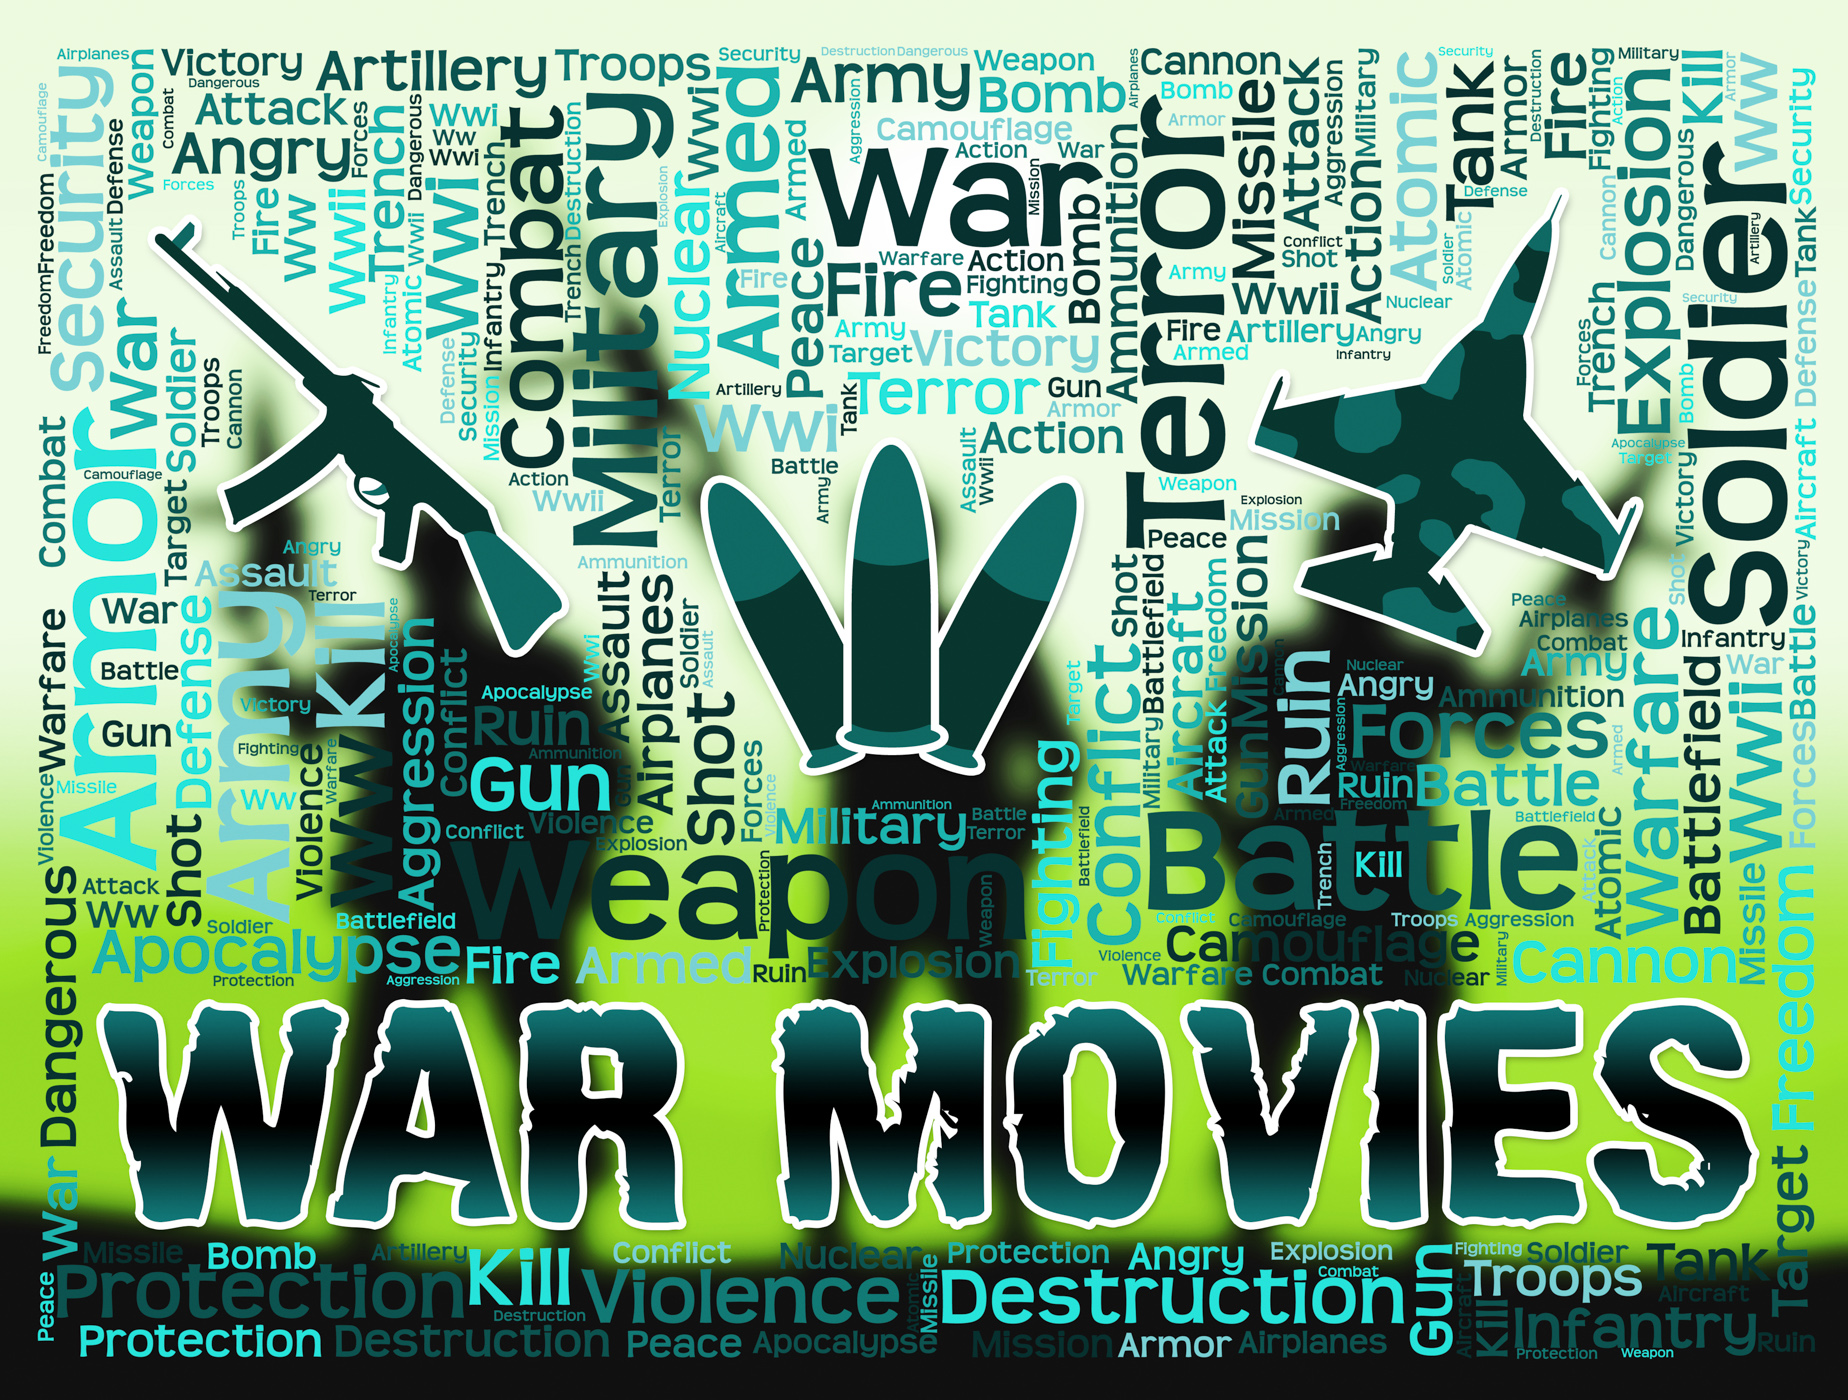 War movies represents military film and bloodshed photo